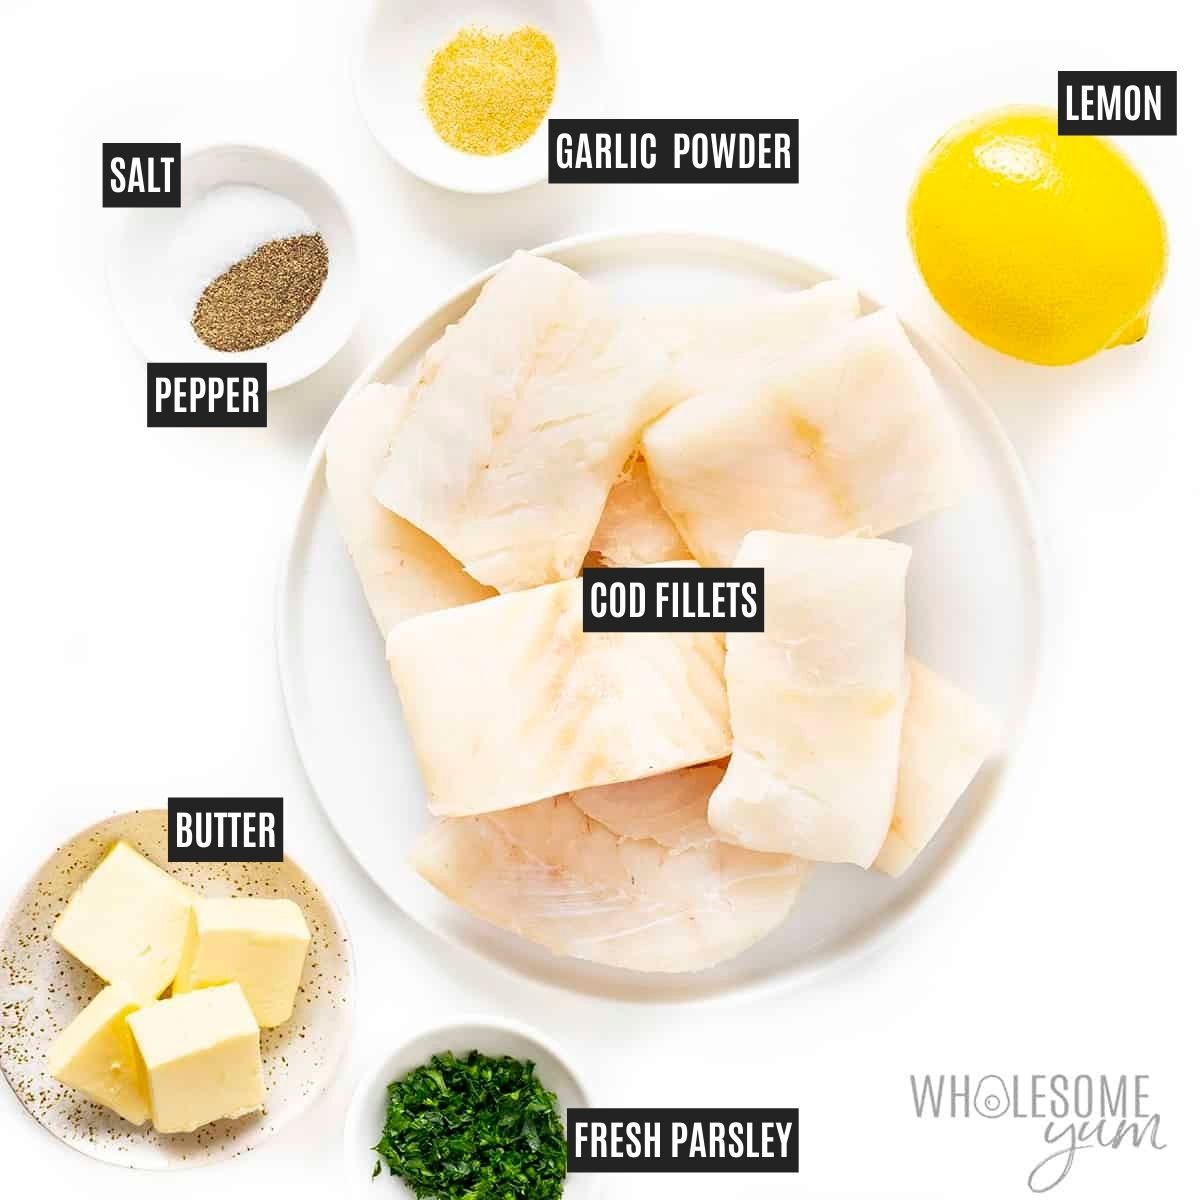 Cod fish fillets on a plate next to small labeled bowls of butter, lemon, parsley, garlic powder, salt, and pepper.